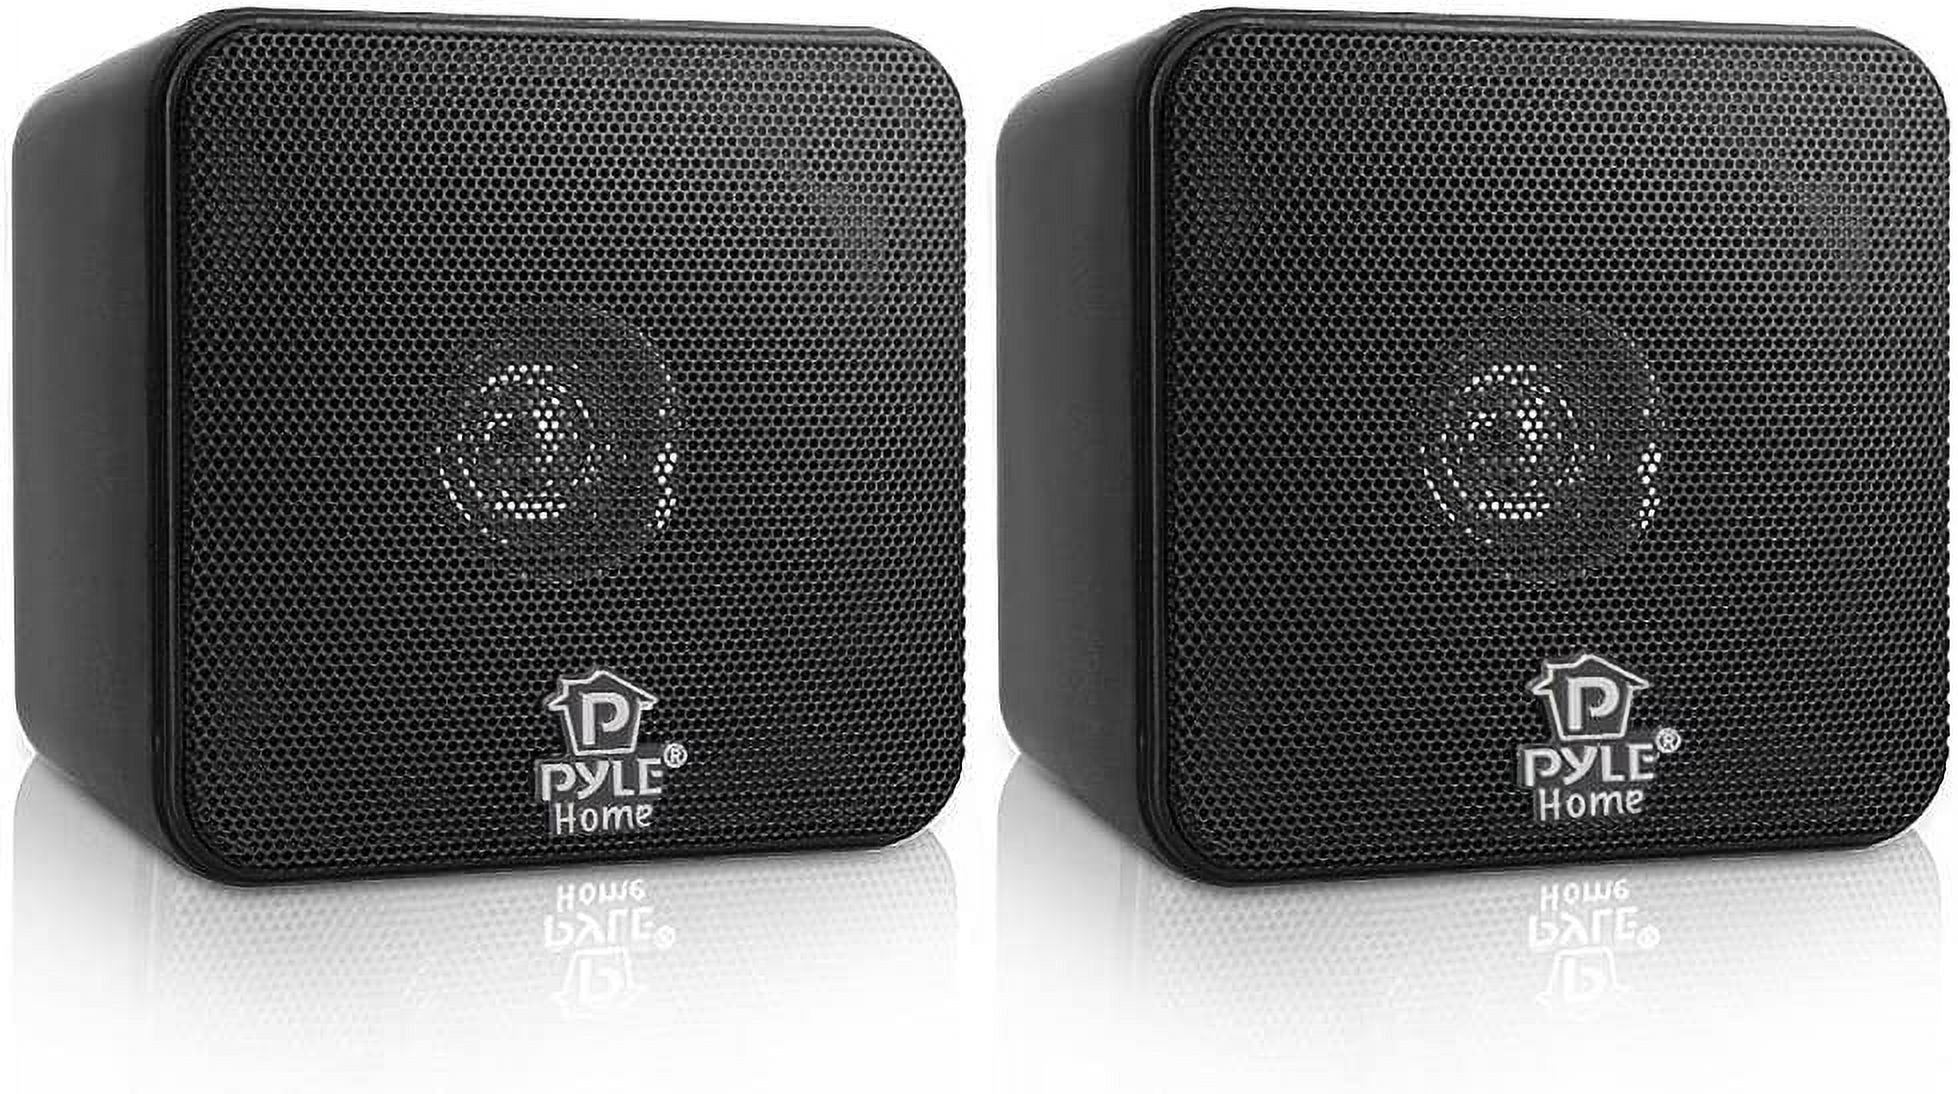 Pyle Home 4 Mini Cube Bookshelf Speakers-Paper Cone Driver, 200 Watt Power, 8 Ohm Impedance, Video Shielding, Home Theater Application and Audio Stereo Surround Sound System - 1 Pair -PCB4BK (Black) - image 1 of 6